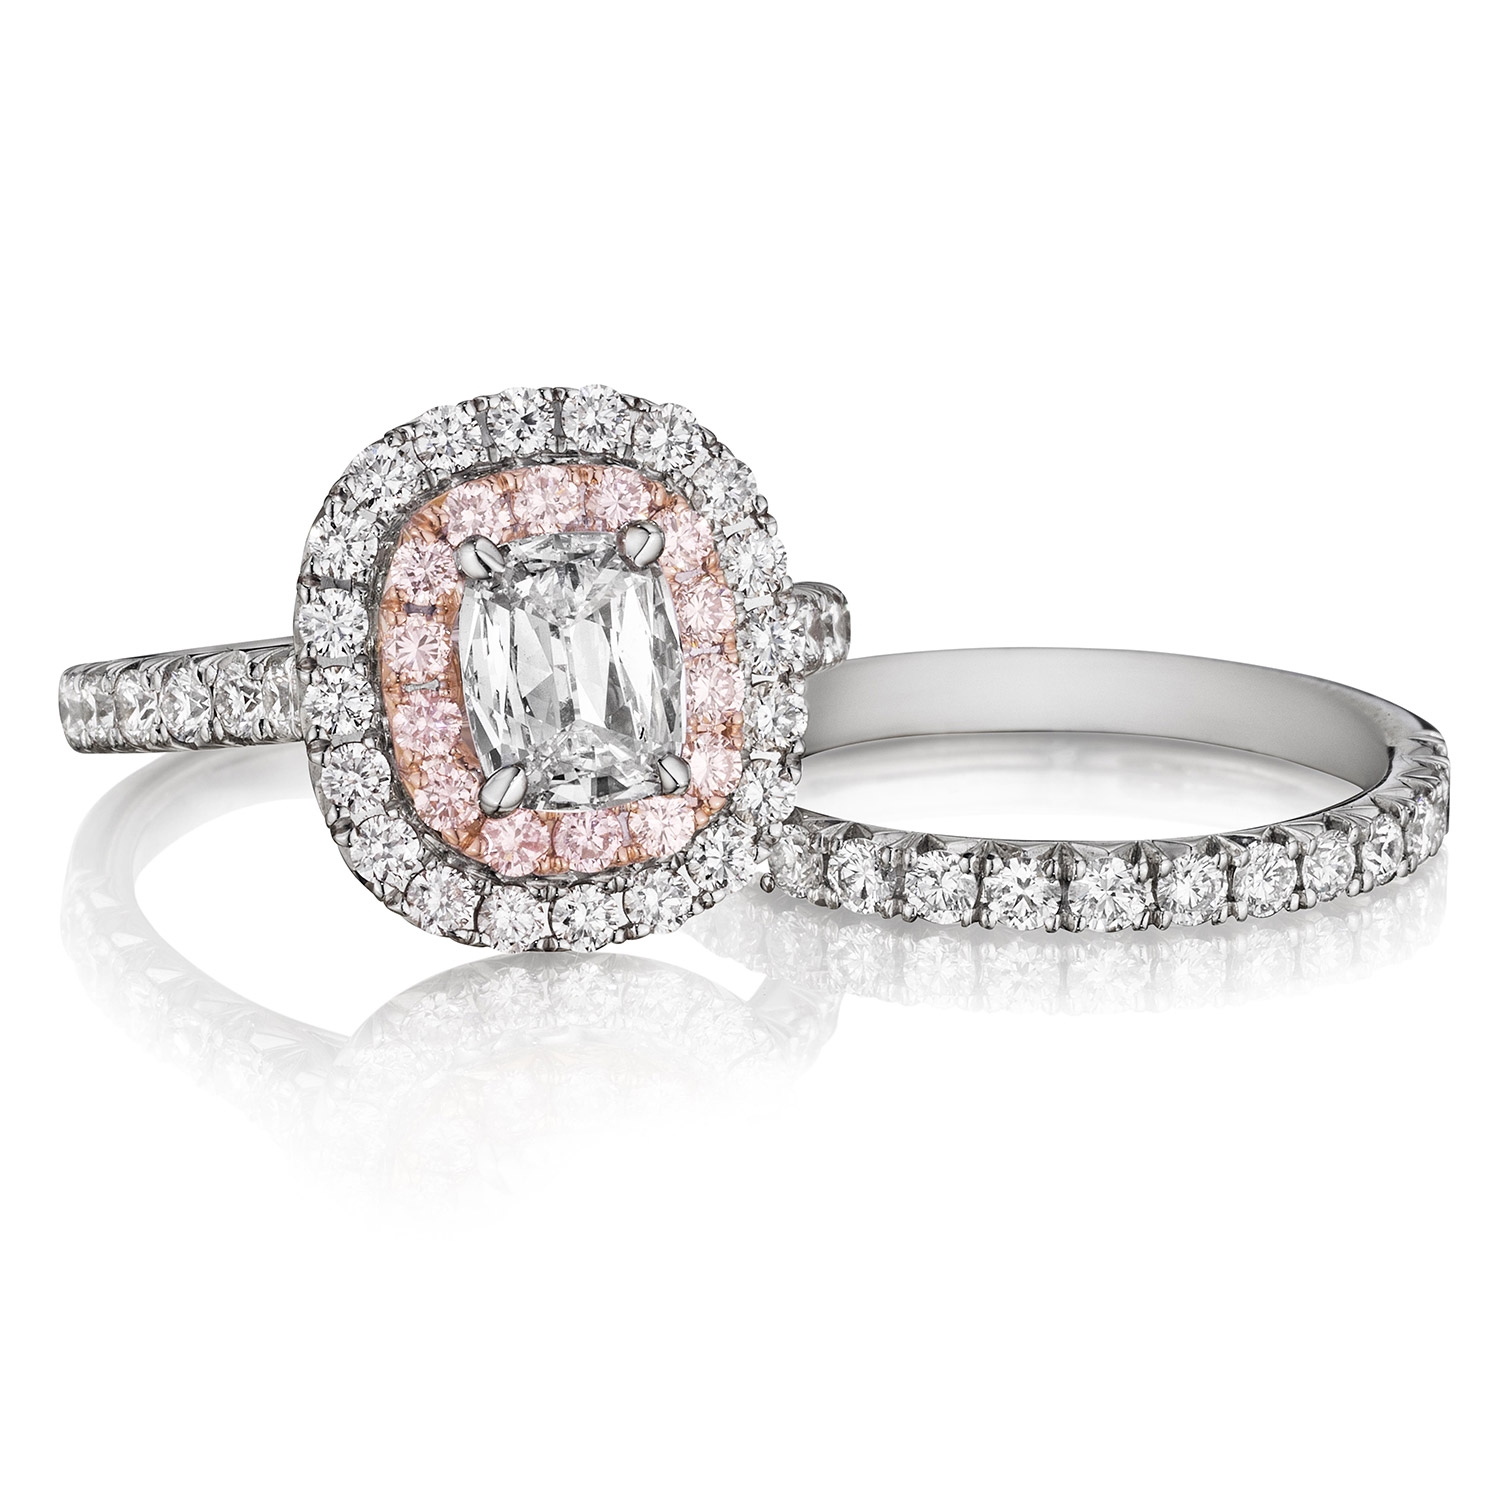 Henri Daussi AQP Cushion Double Halo with Pink Diamonds Engagement Ring Alternative View 2